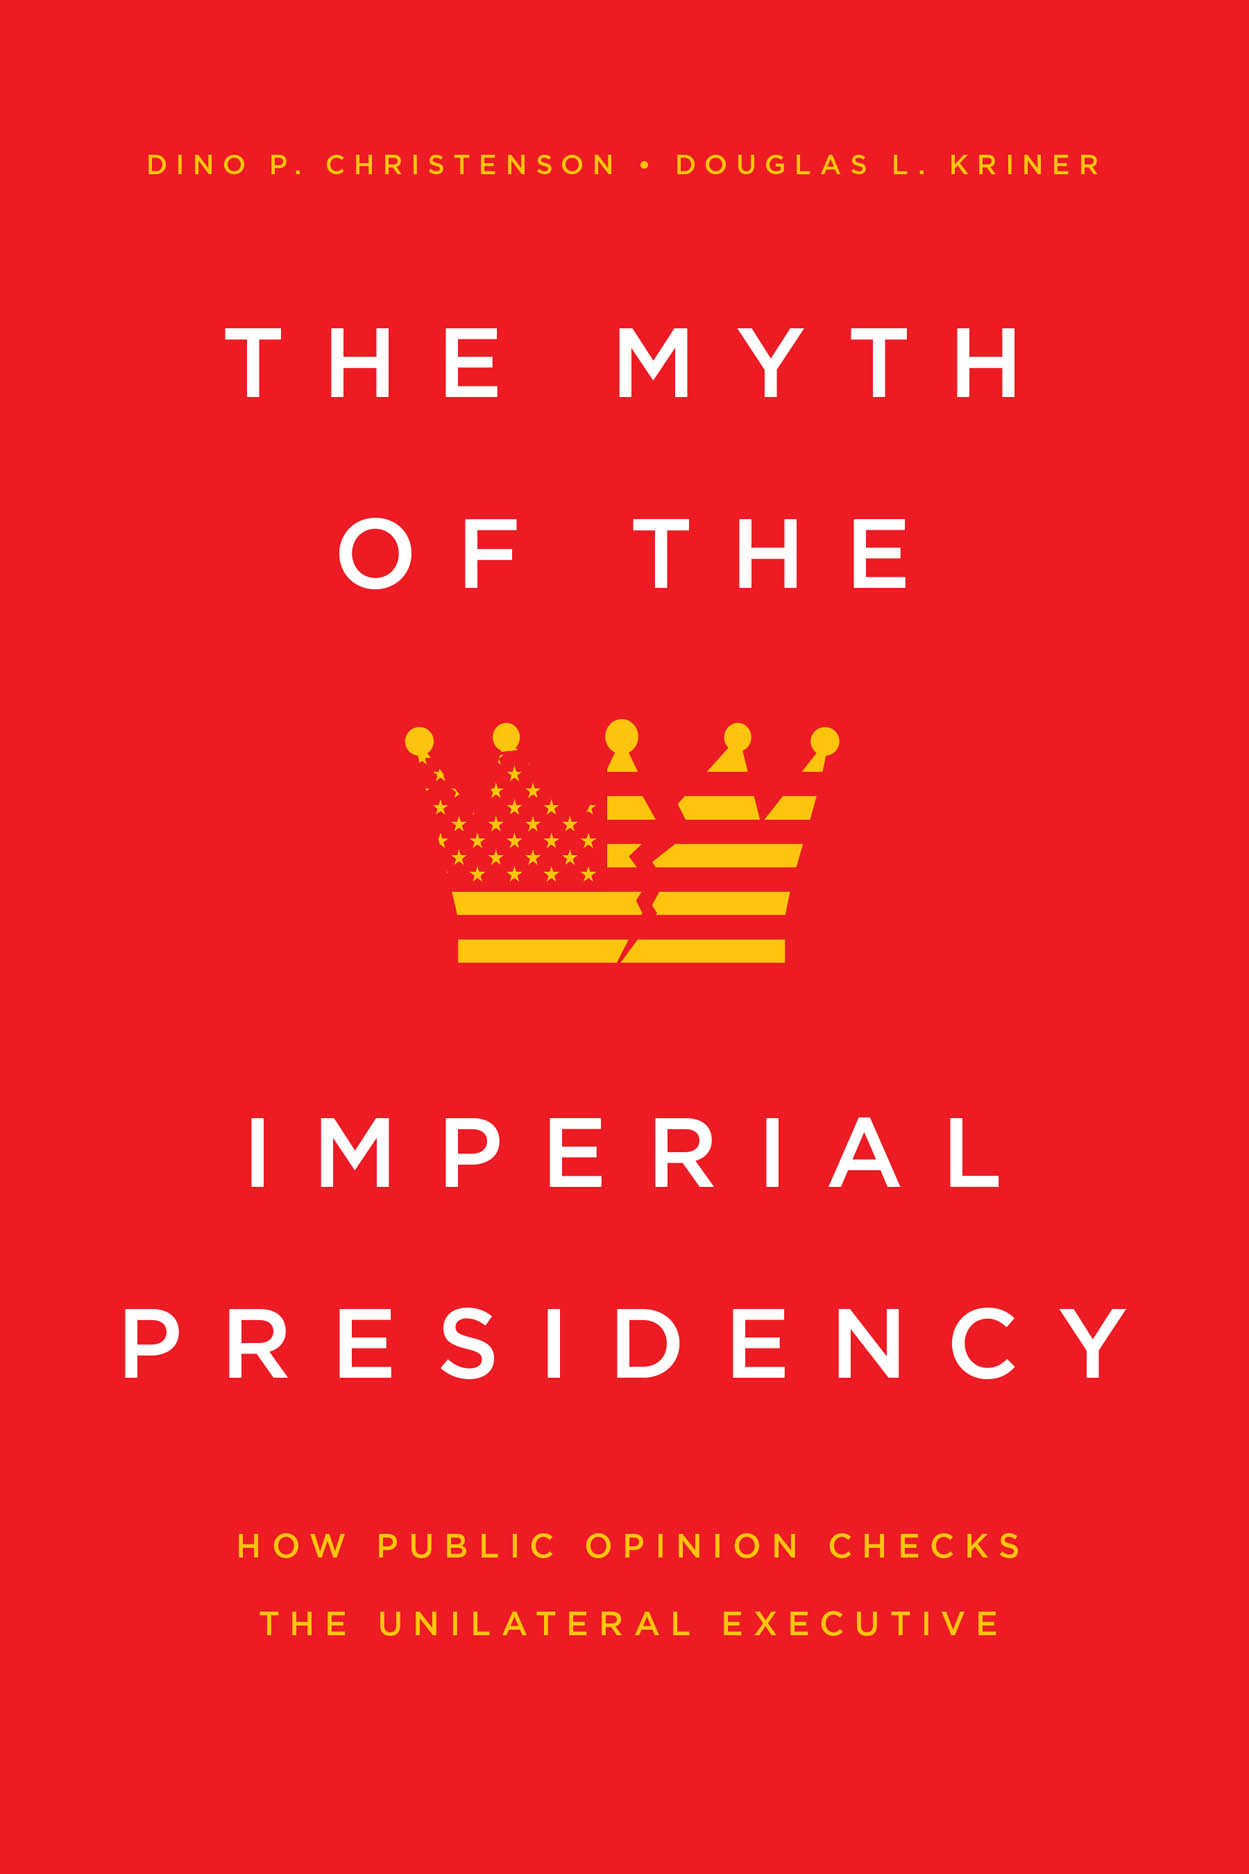 The Myth of the Imperial Presidency: How Public Opinion Checks the  Unilateral Executive, Christenson, Kriner